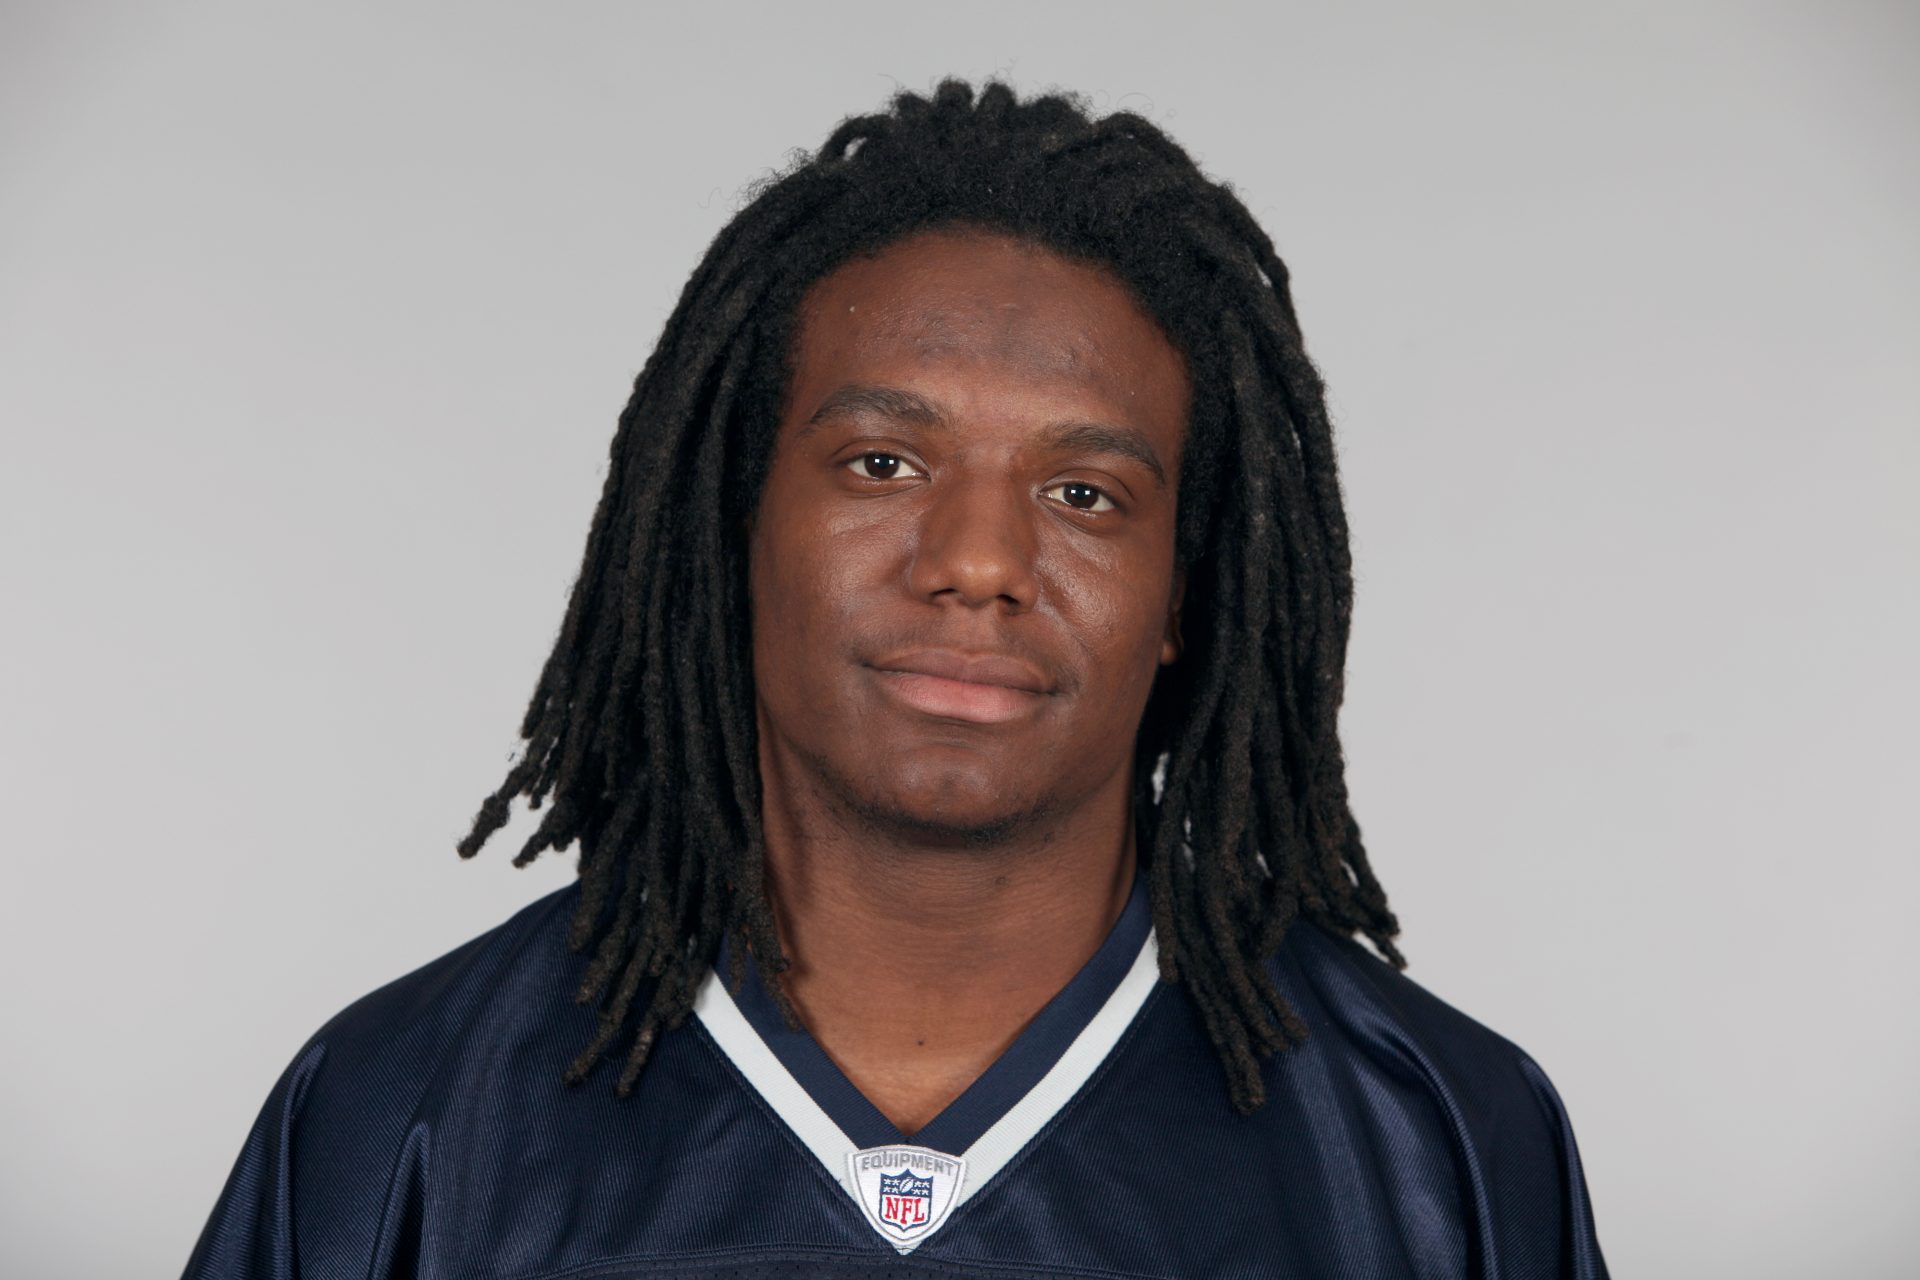 Former NFL player charged